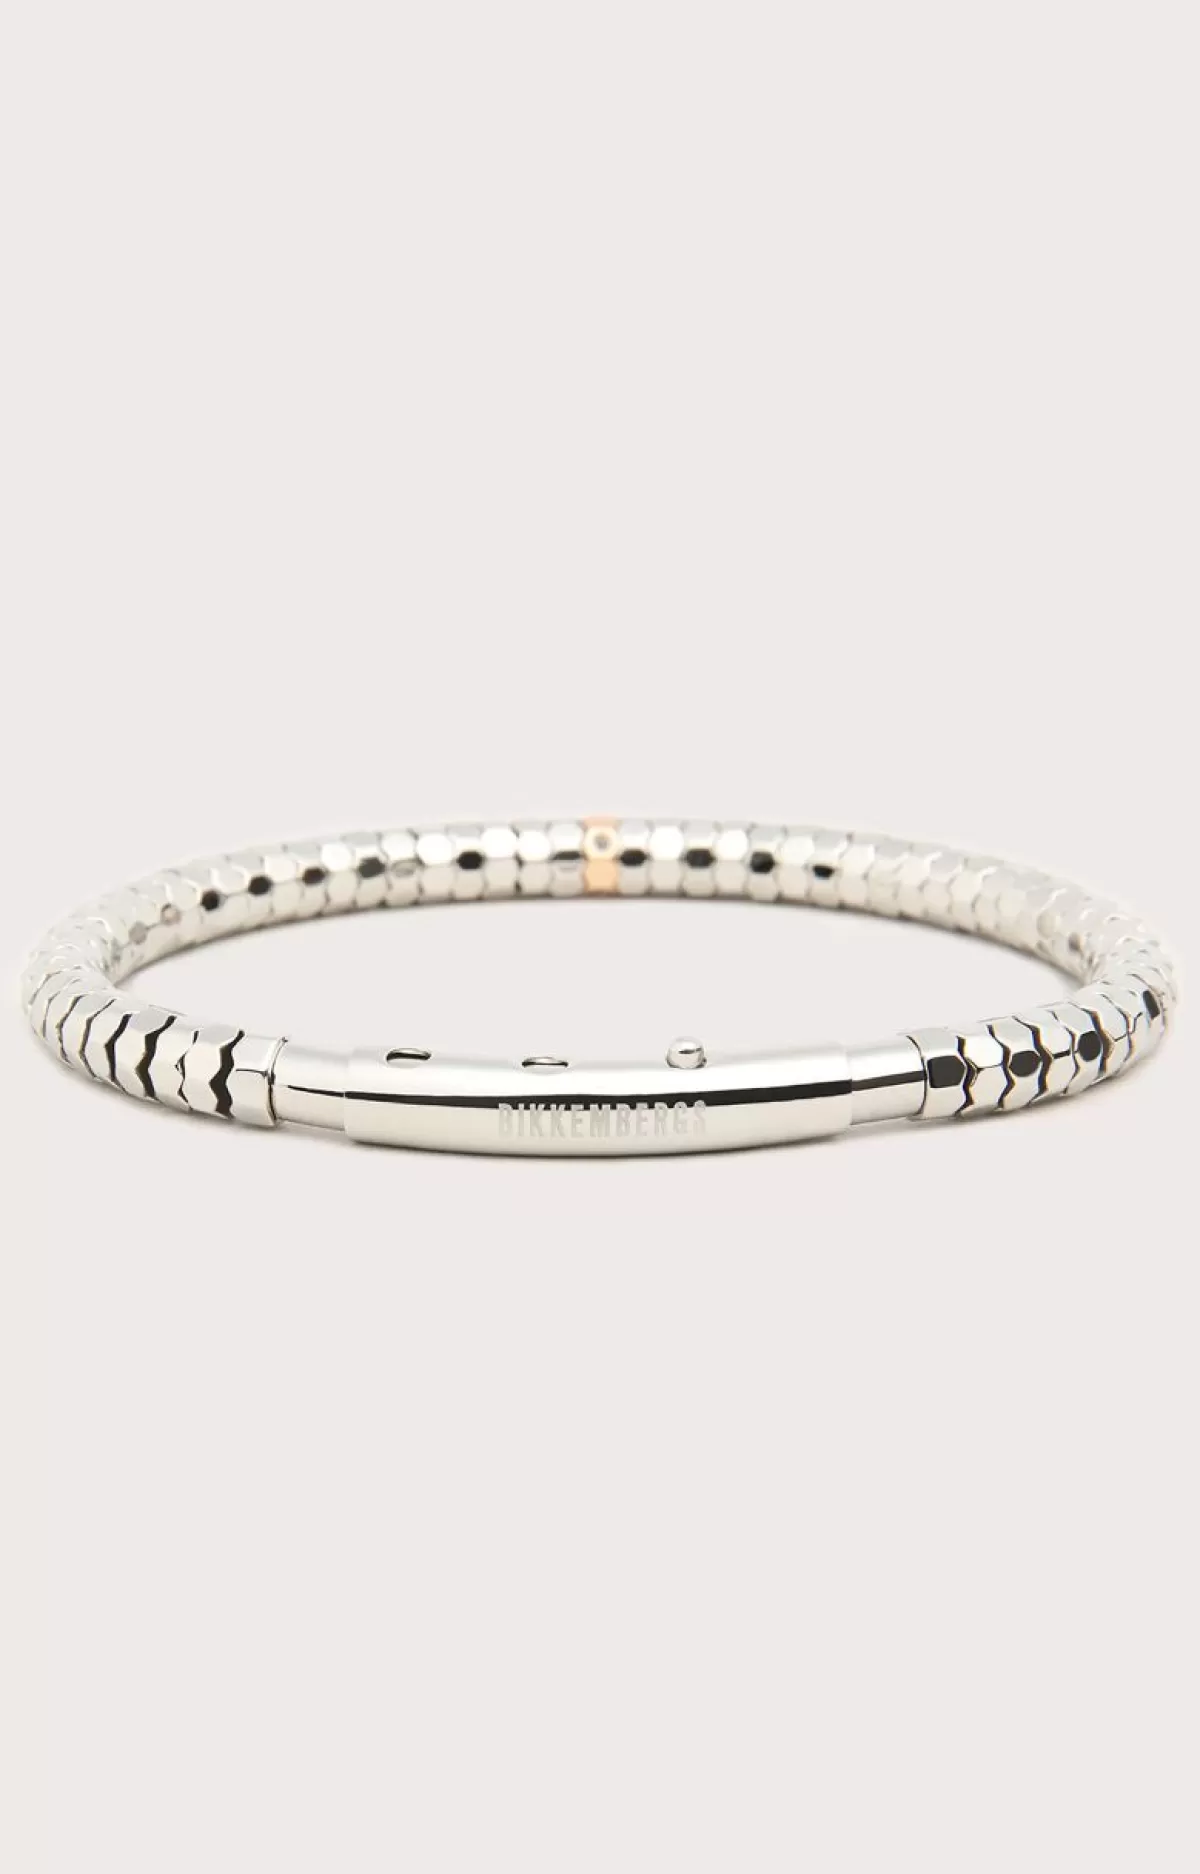 Bikkembergs Men'S Bracelet With Hexagons And Diamonds 320 Clearance